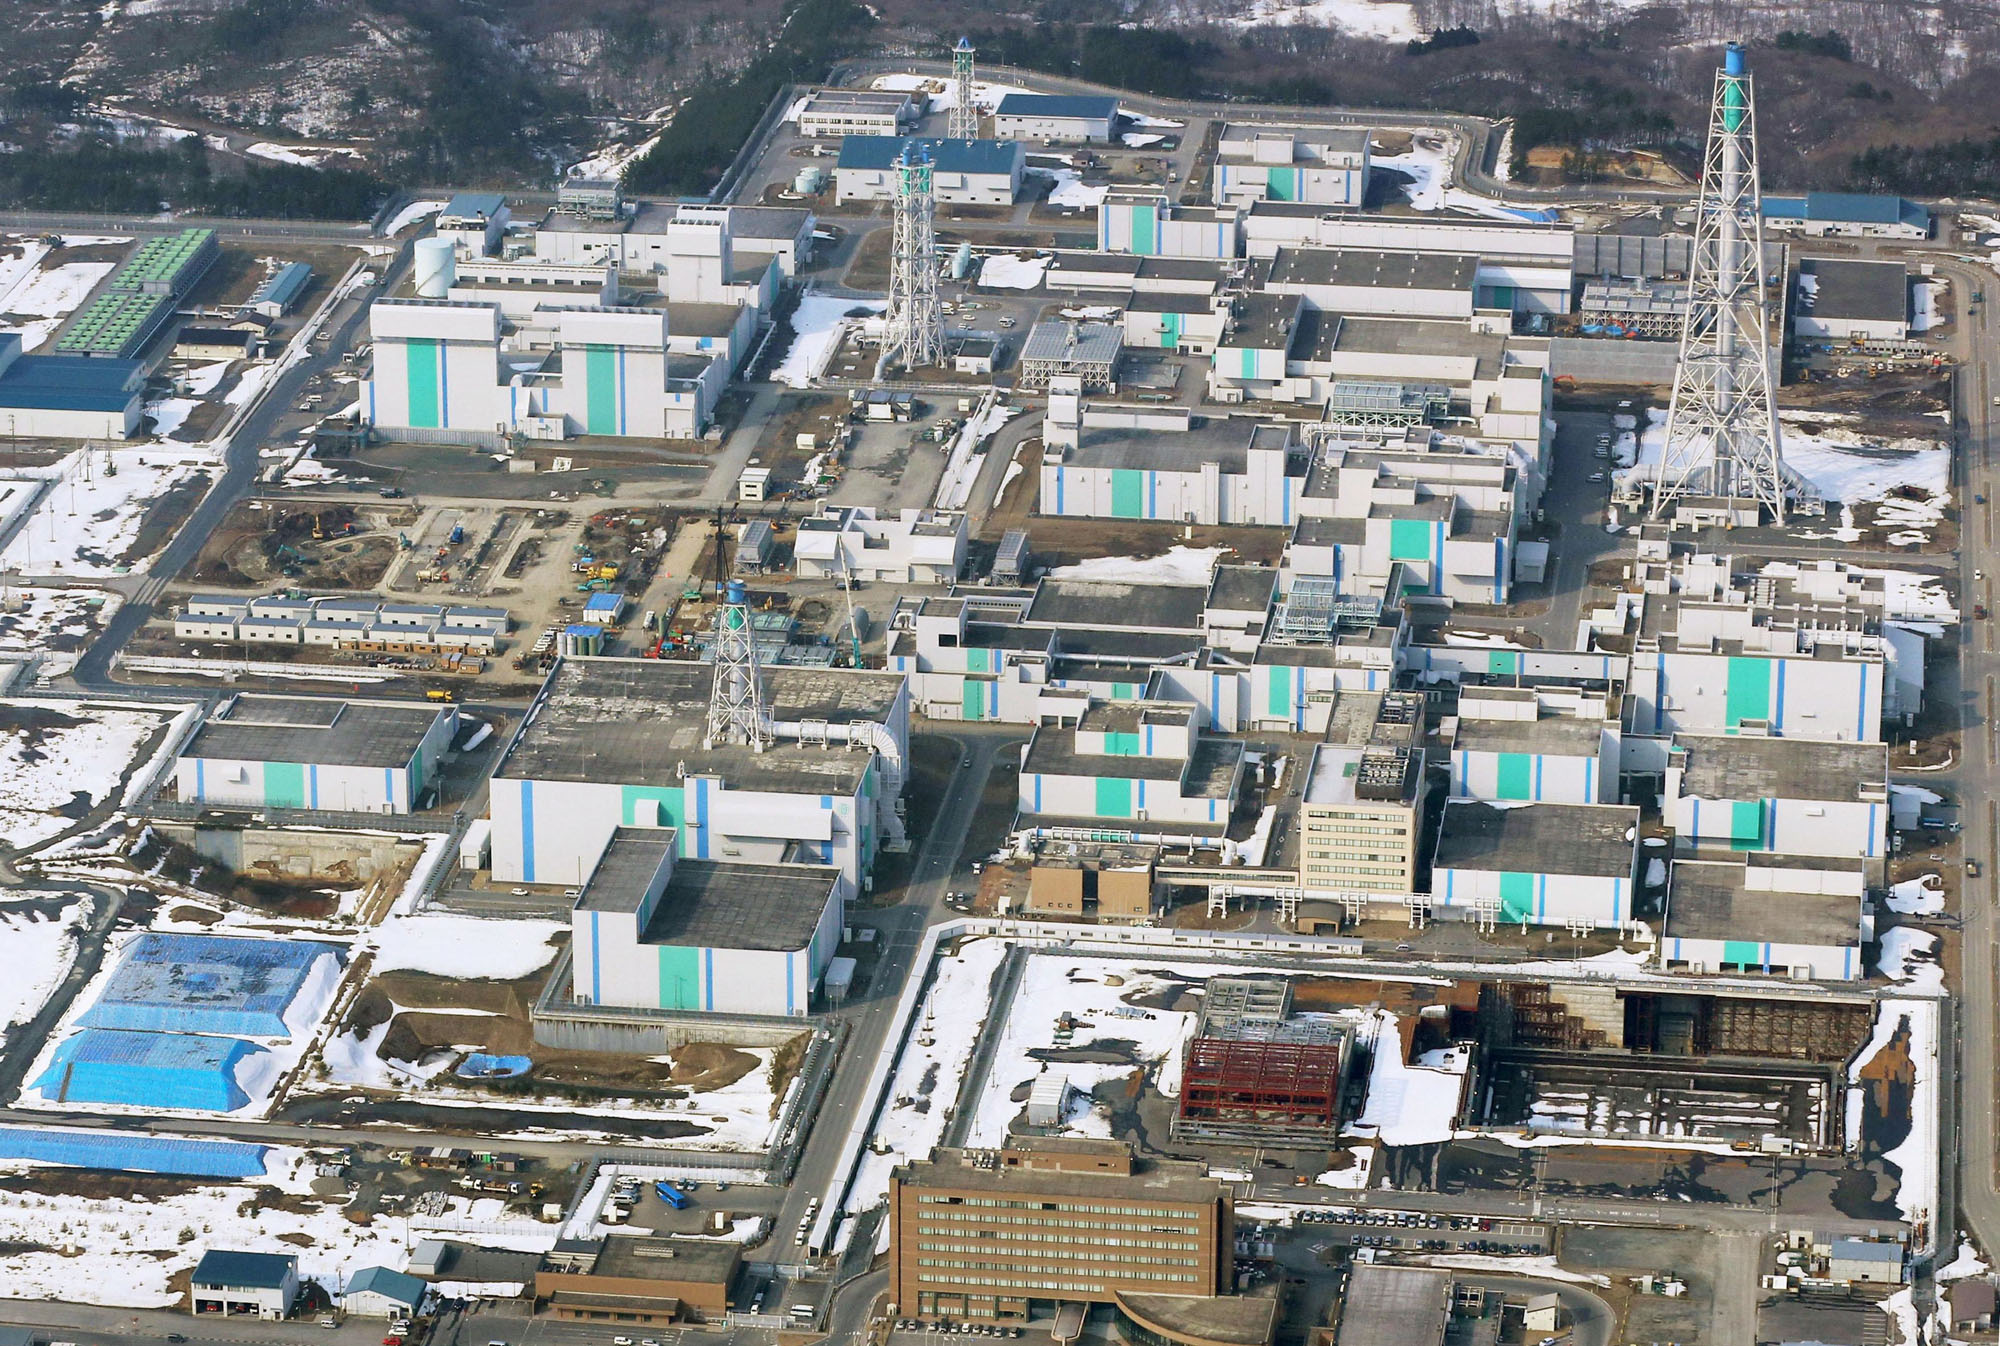 The Rokkasho plant in Aomori Prefecture, a key pillar of the country's nuclear fuel recycling policy, is seen in March 2014. | KYODO